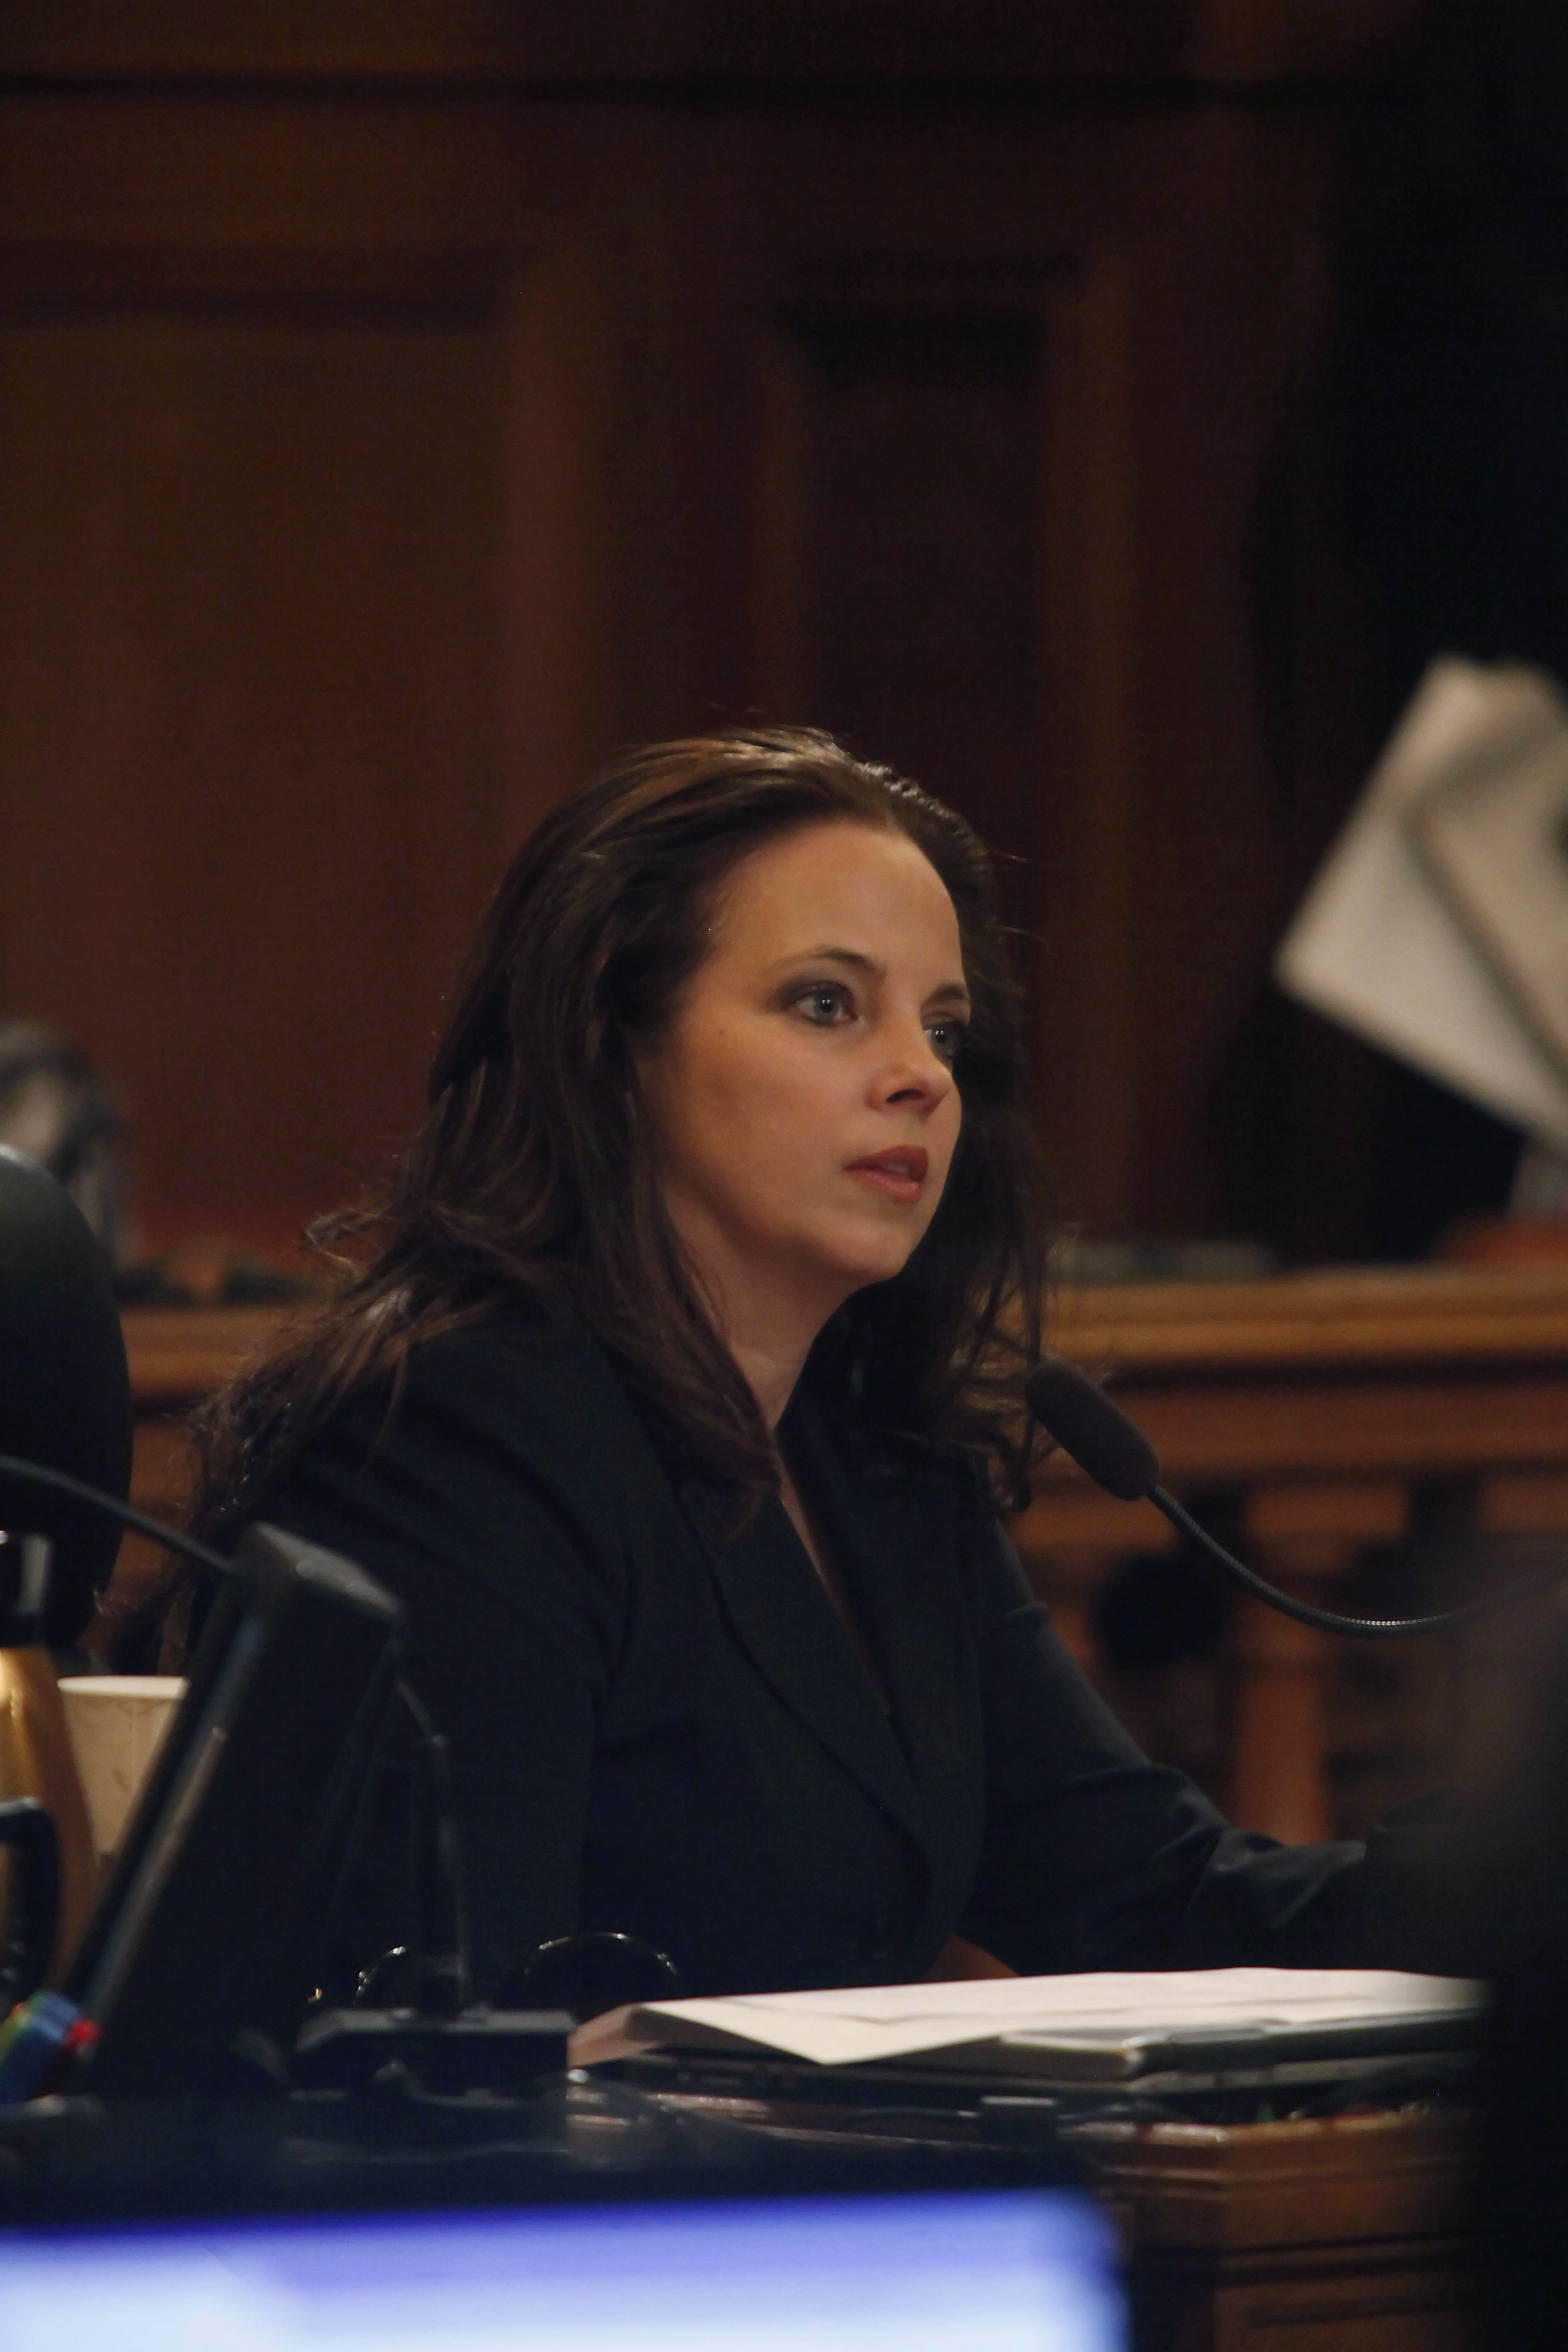 A woman in a black jacket sits at a desk with a microphone, papers in front of her, in a wood-paneled room.